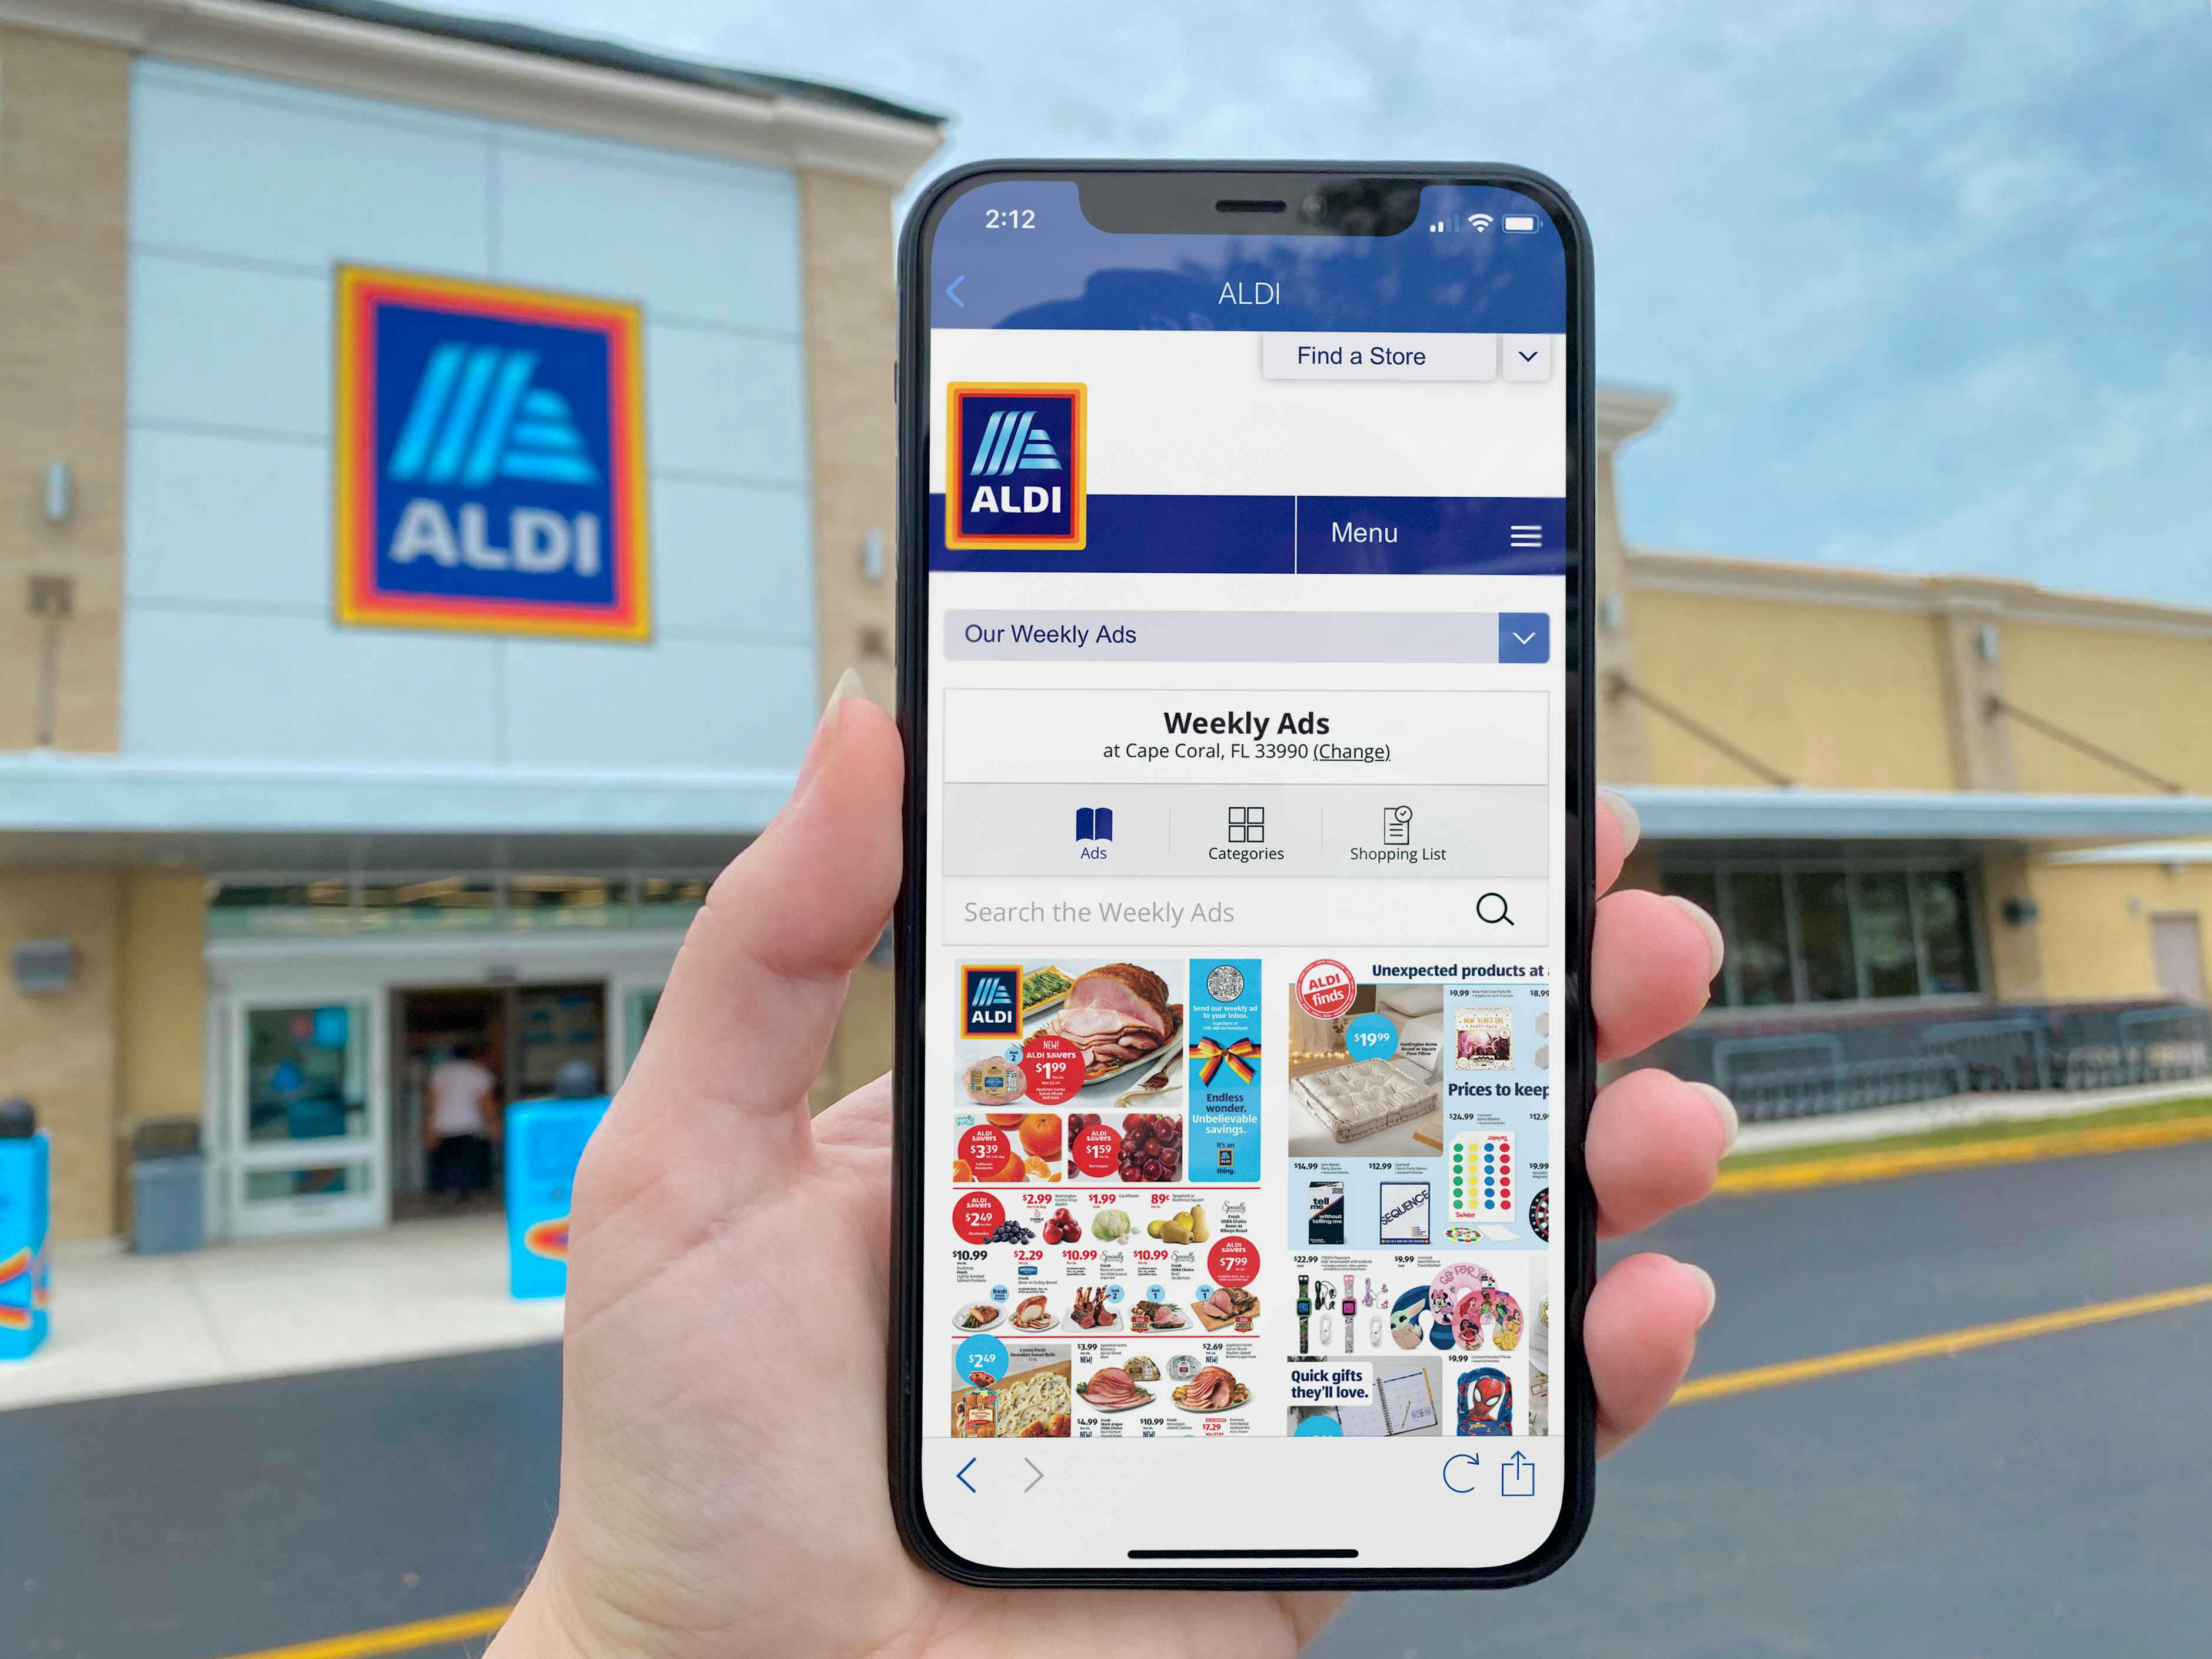 Someone holding up their phone displaying the Aldi app in front of an Aldi store